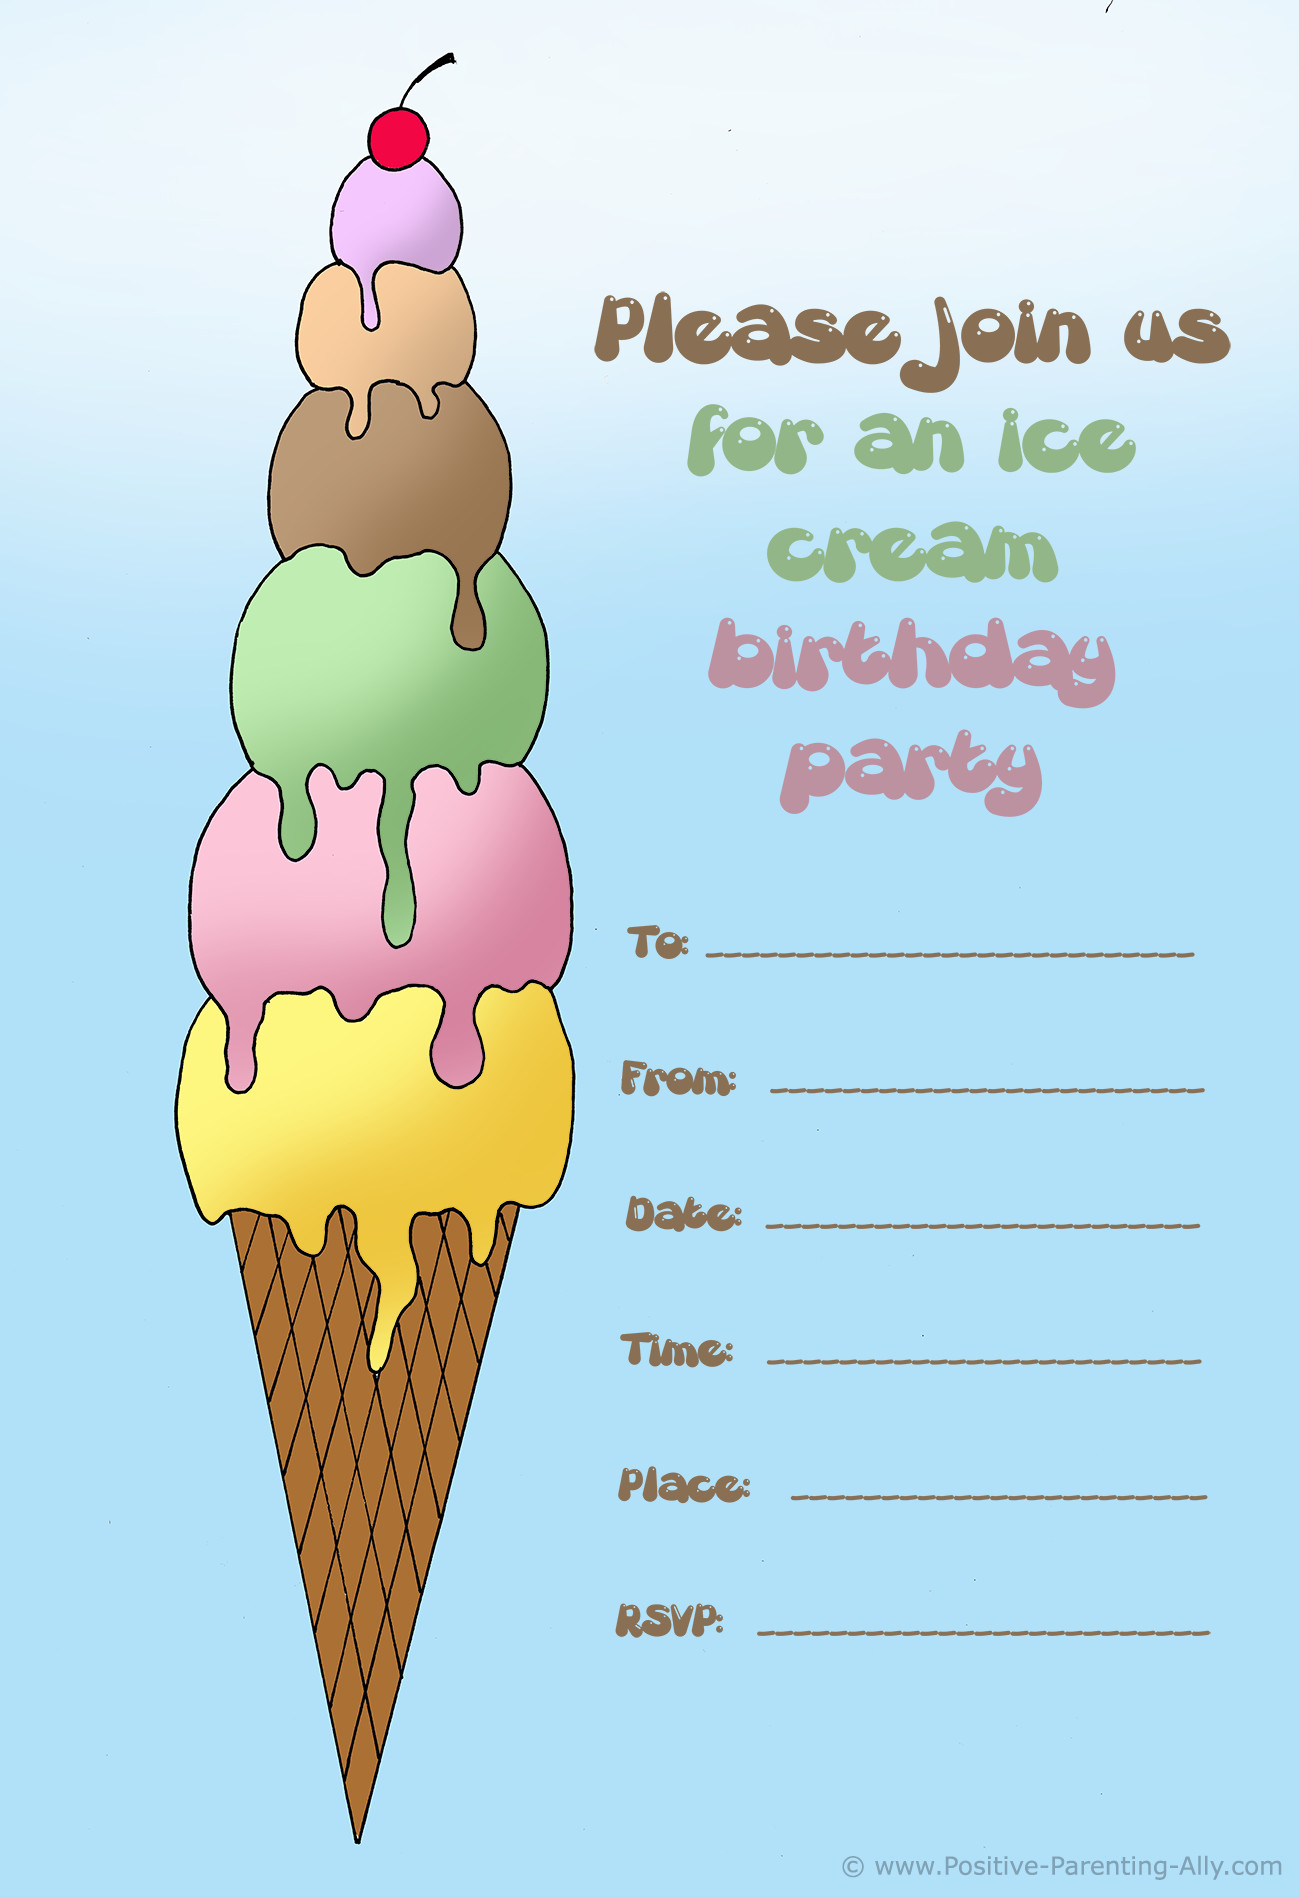 Ice Cream Birthday Party Invitations
 Free Birthday Invitations to Print for Kids Choose Your Theme